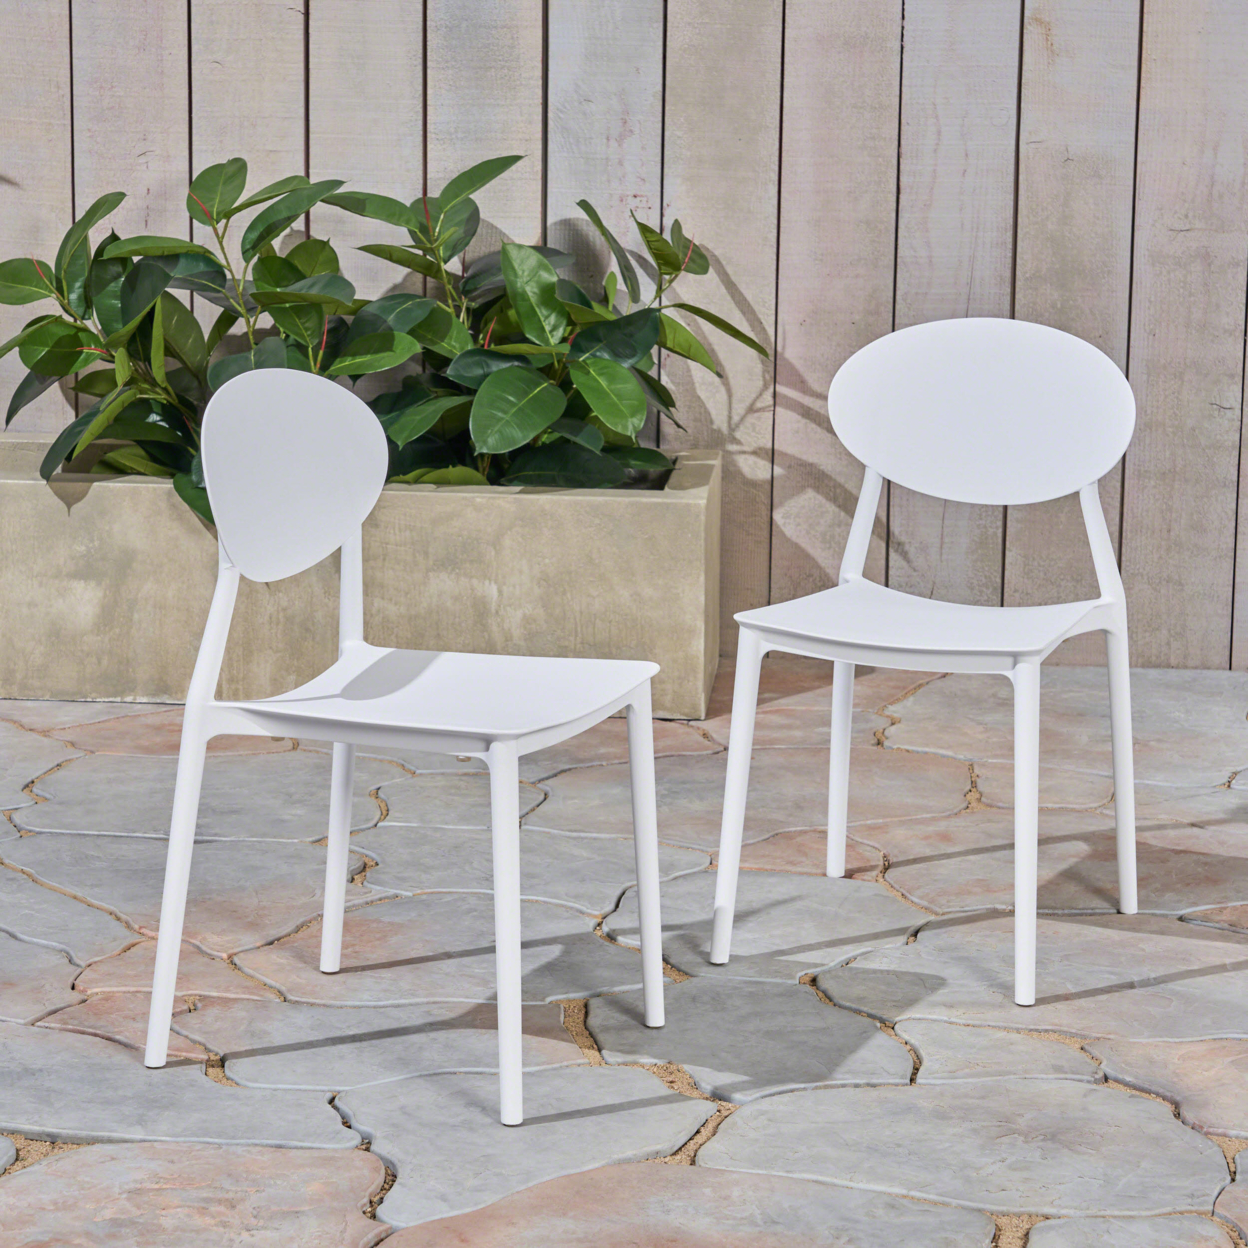 Brynn Outdoor Plastic Chairs (Set Of 2) - White, Set Of 2